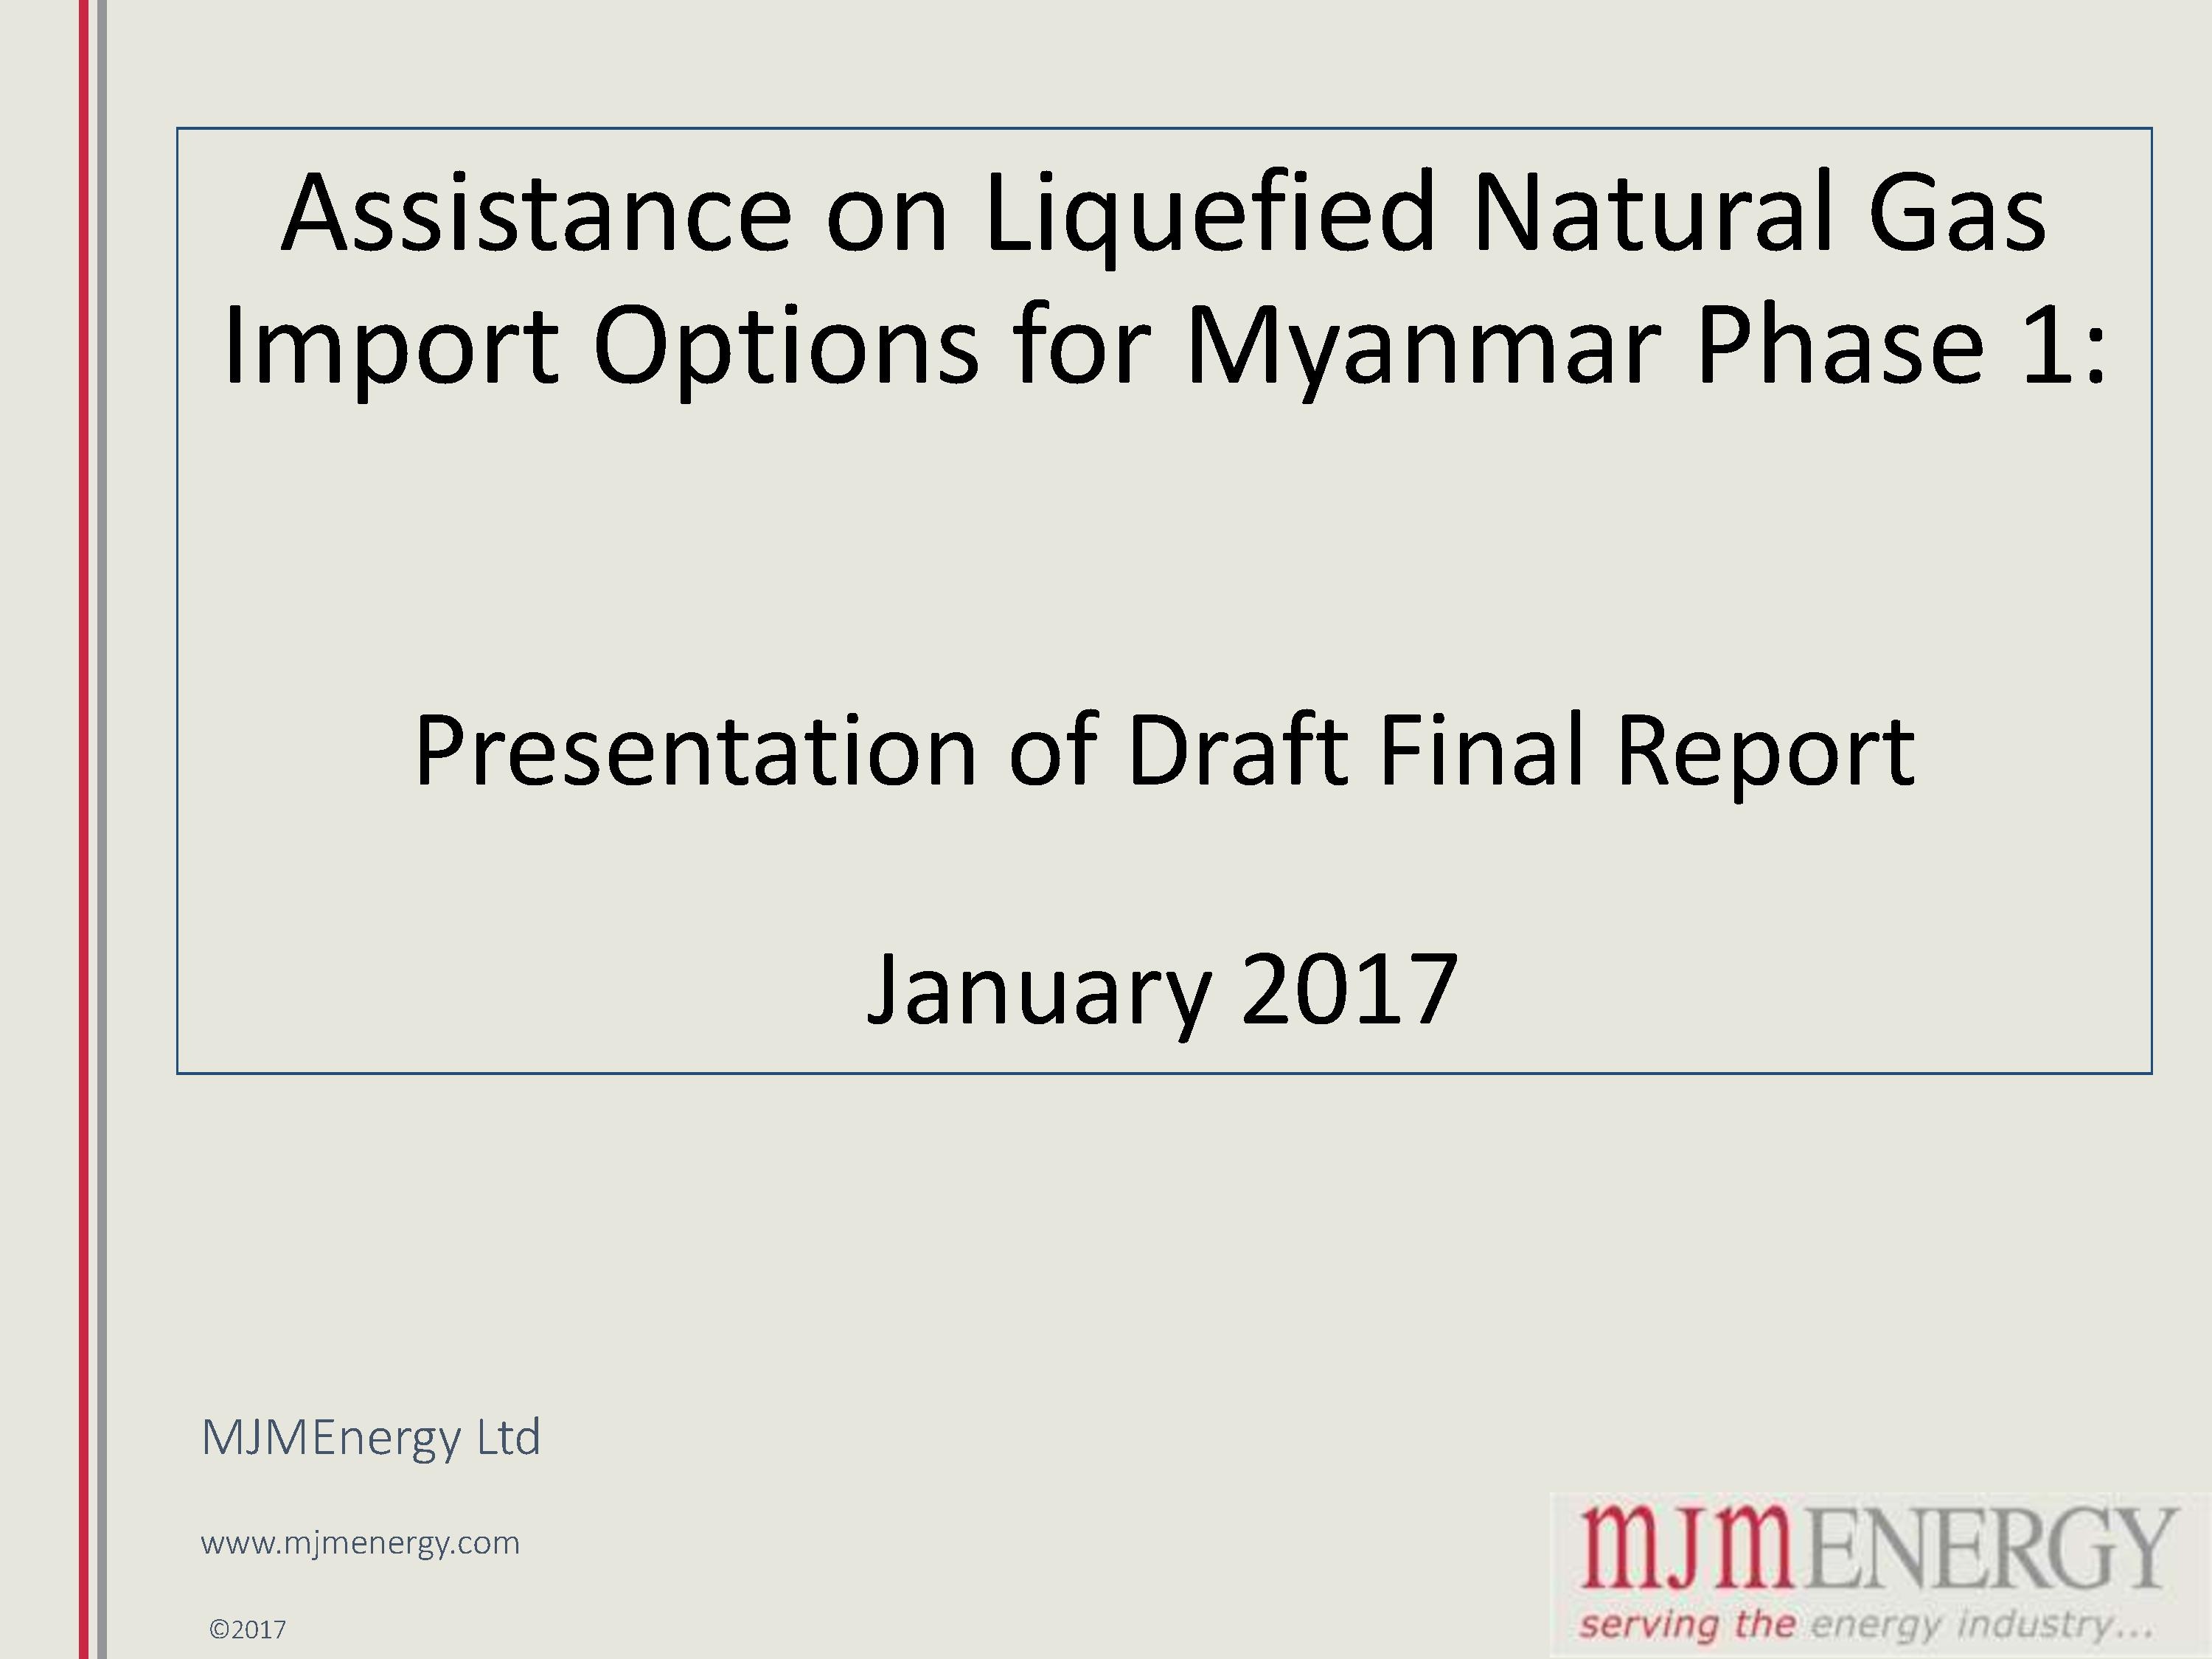 Myanmar LNG Import Options Phase I, Draft Final Report, January 2017